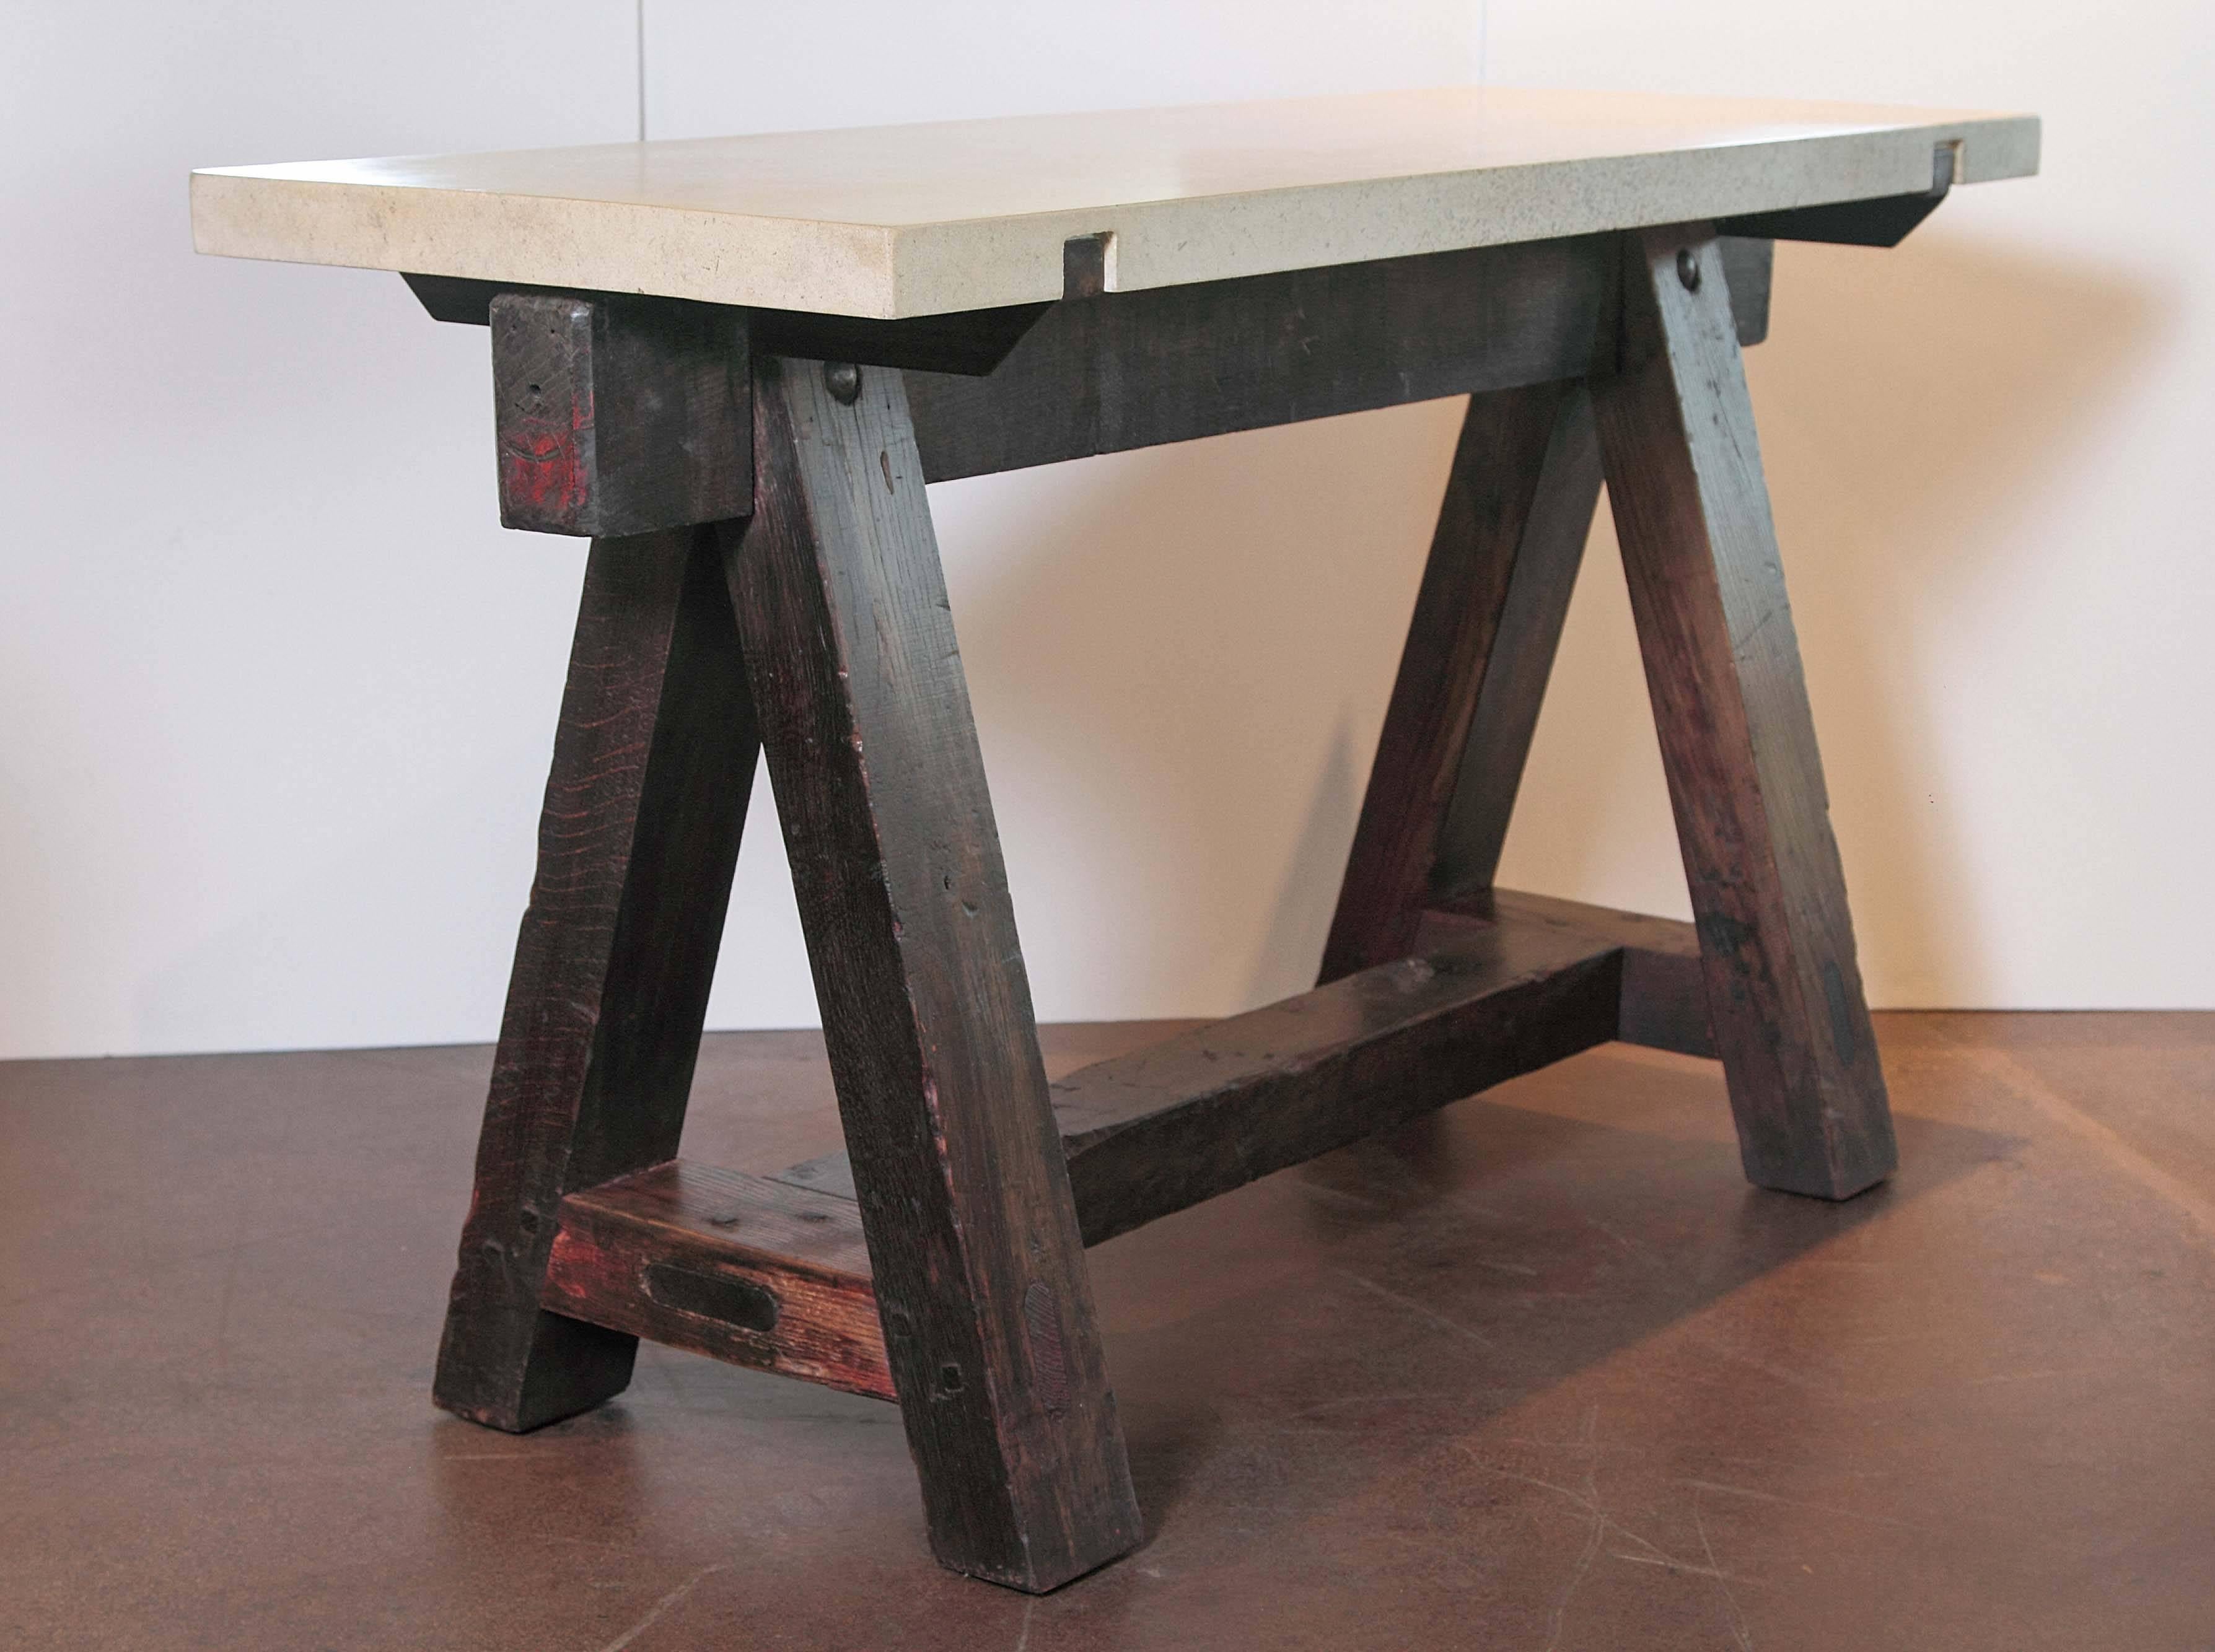 Rustic Antique Dark Pine French Saw Horse Entry Tables